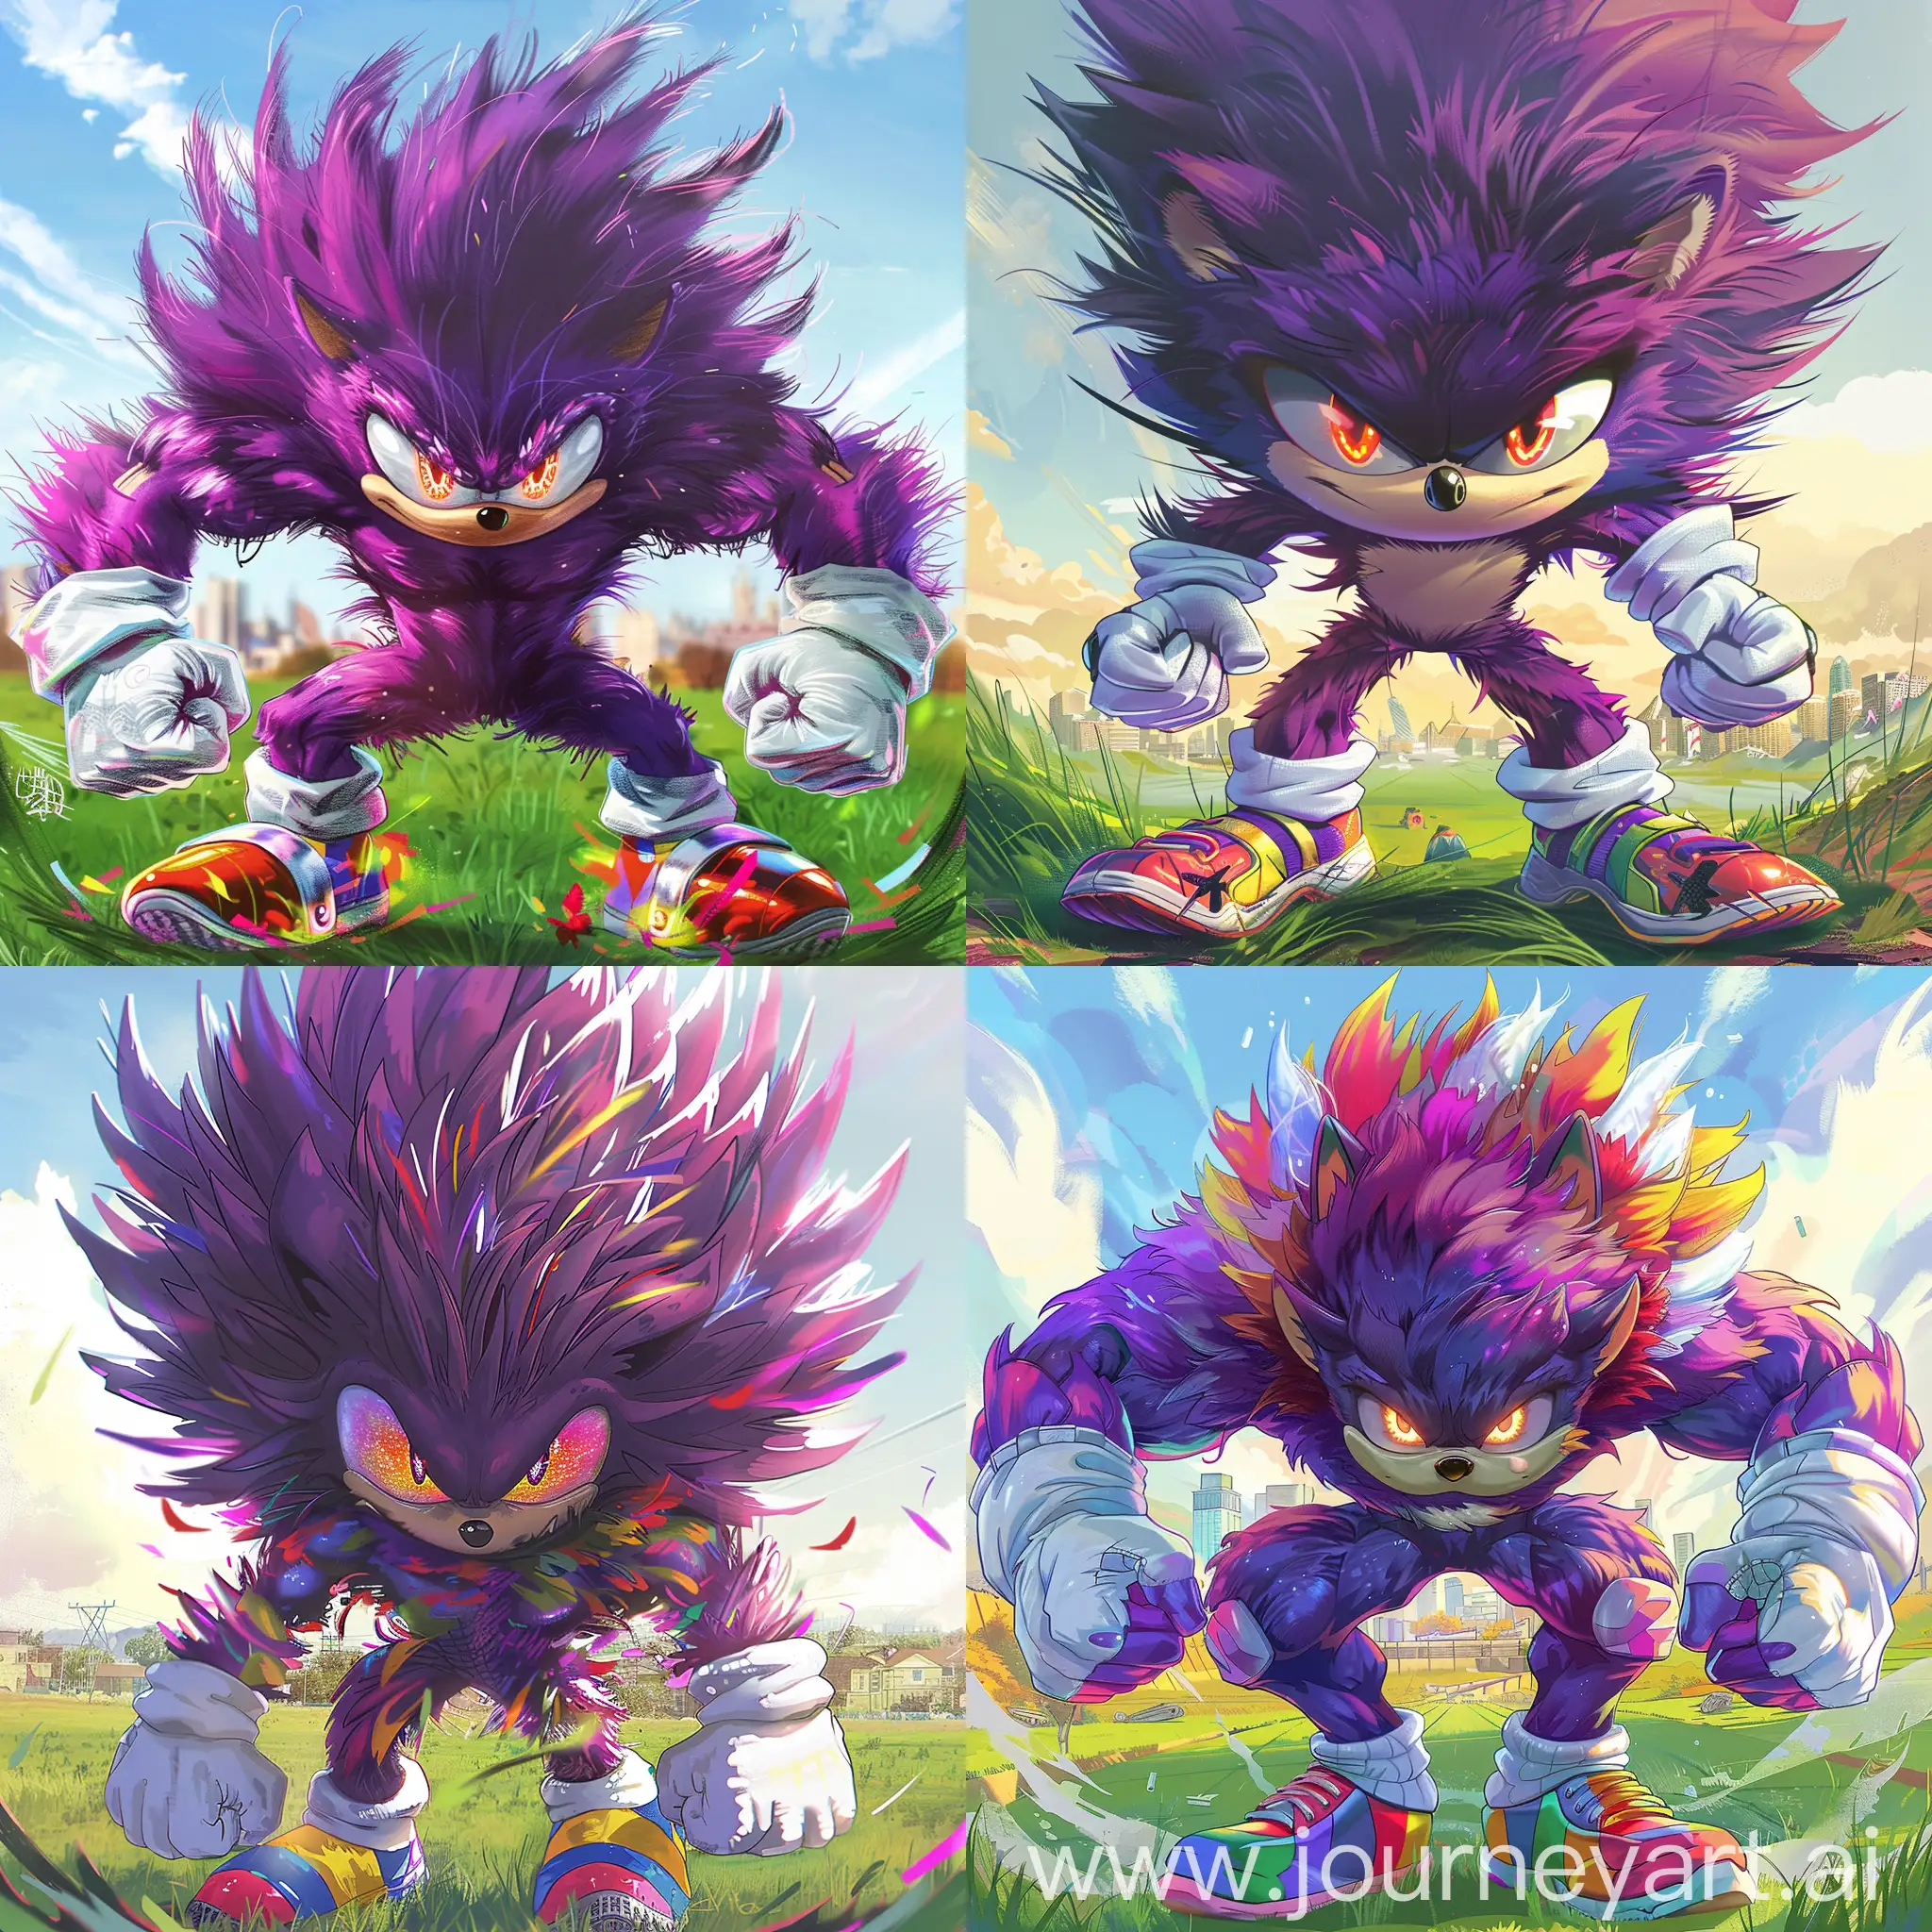 Create an image of a highly detailed, muscular, anthropomorphic purple hedgehog character with intense, glowing eyes and a determined expression. The hedgehog should have vibrant, flowing fur, white gloves, and oversized, colorful shoes. The background should be a bright, sunny day with a grassy field and a distant cityscape. The overall style should be vibrant and dynamic, capturing a sense of power and energy.
